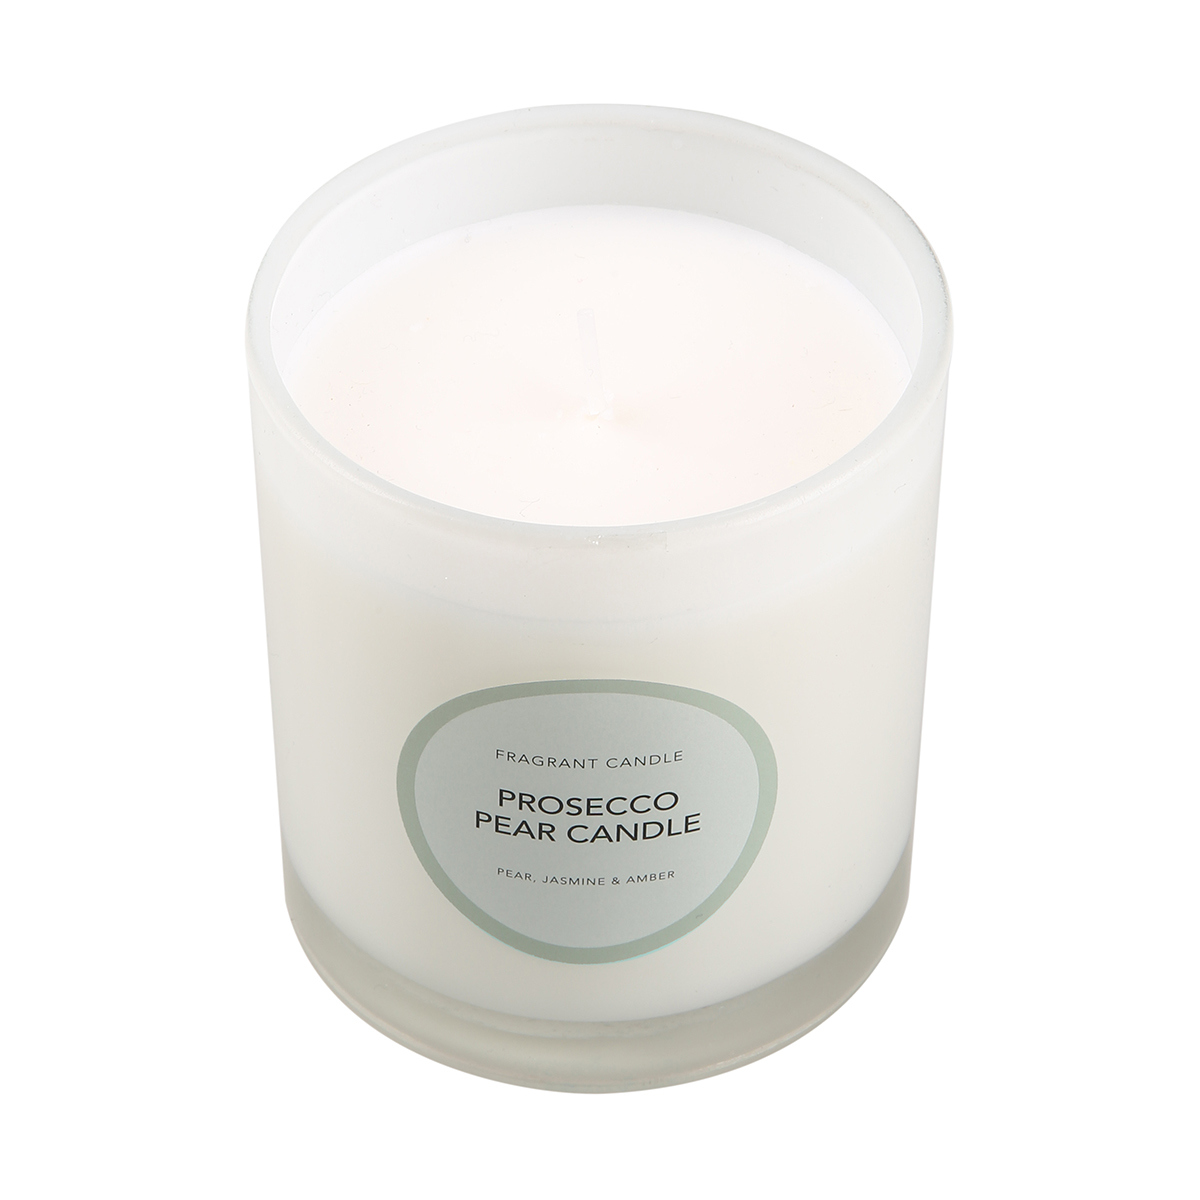 Shop - Prosecco Pear Candle - JF Collection by James Follent